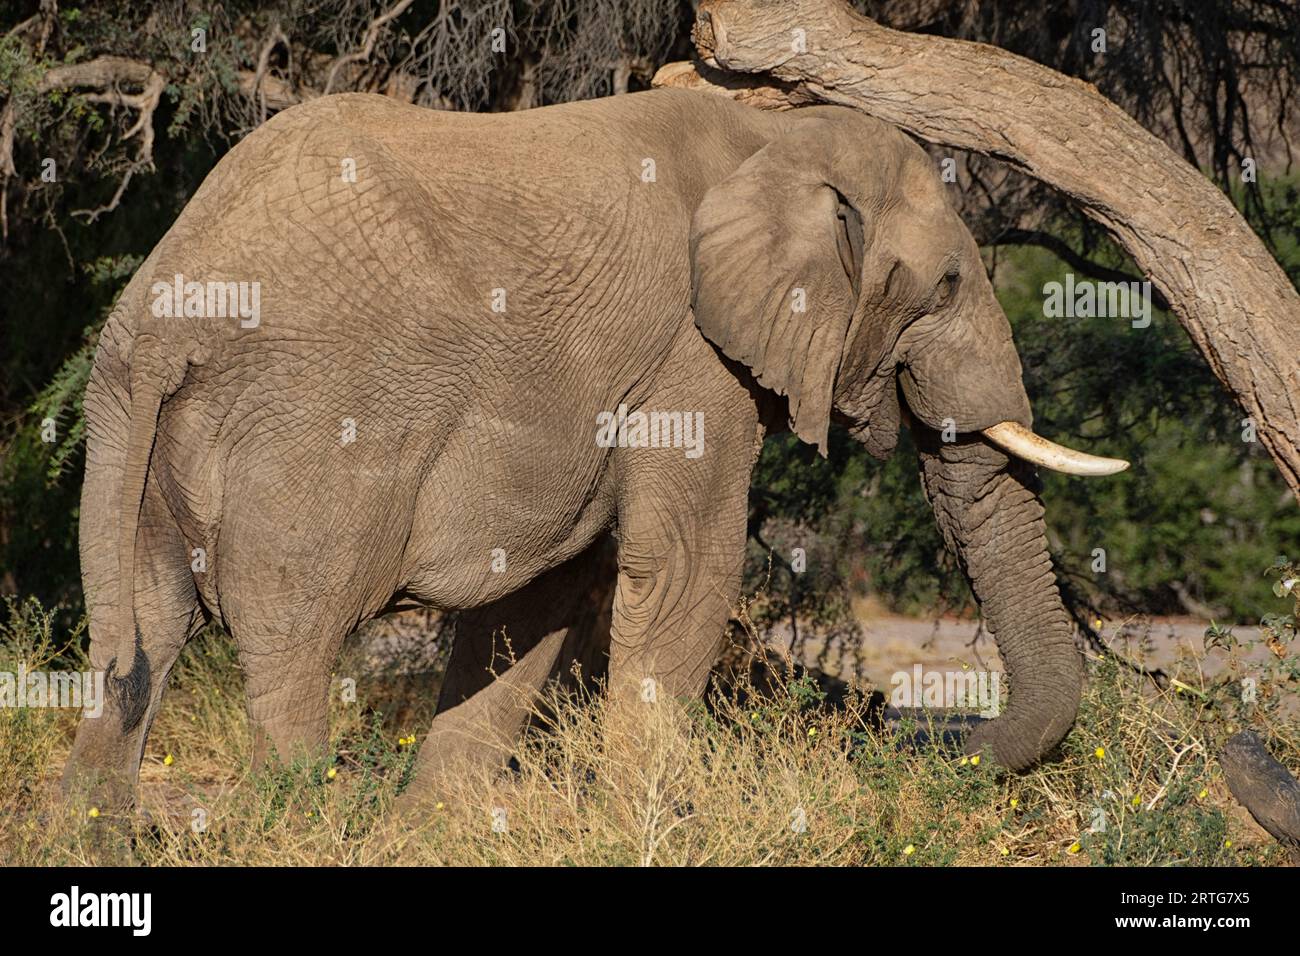 African elephant at nature reserve in Namibia standing near Acacia tree Stock Photo